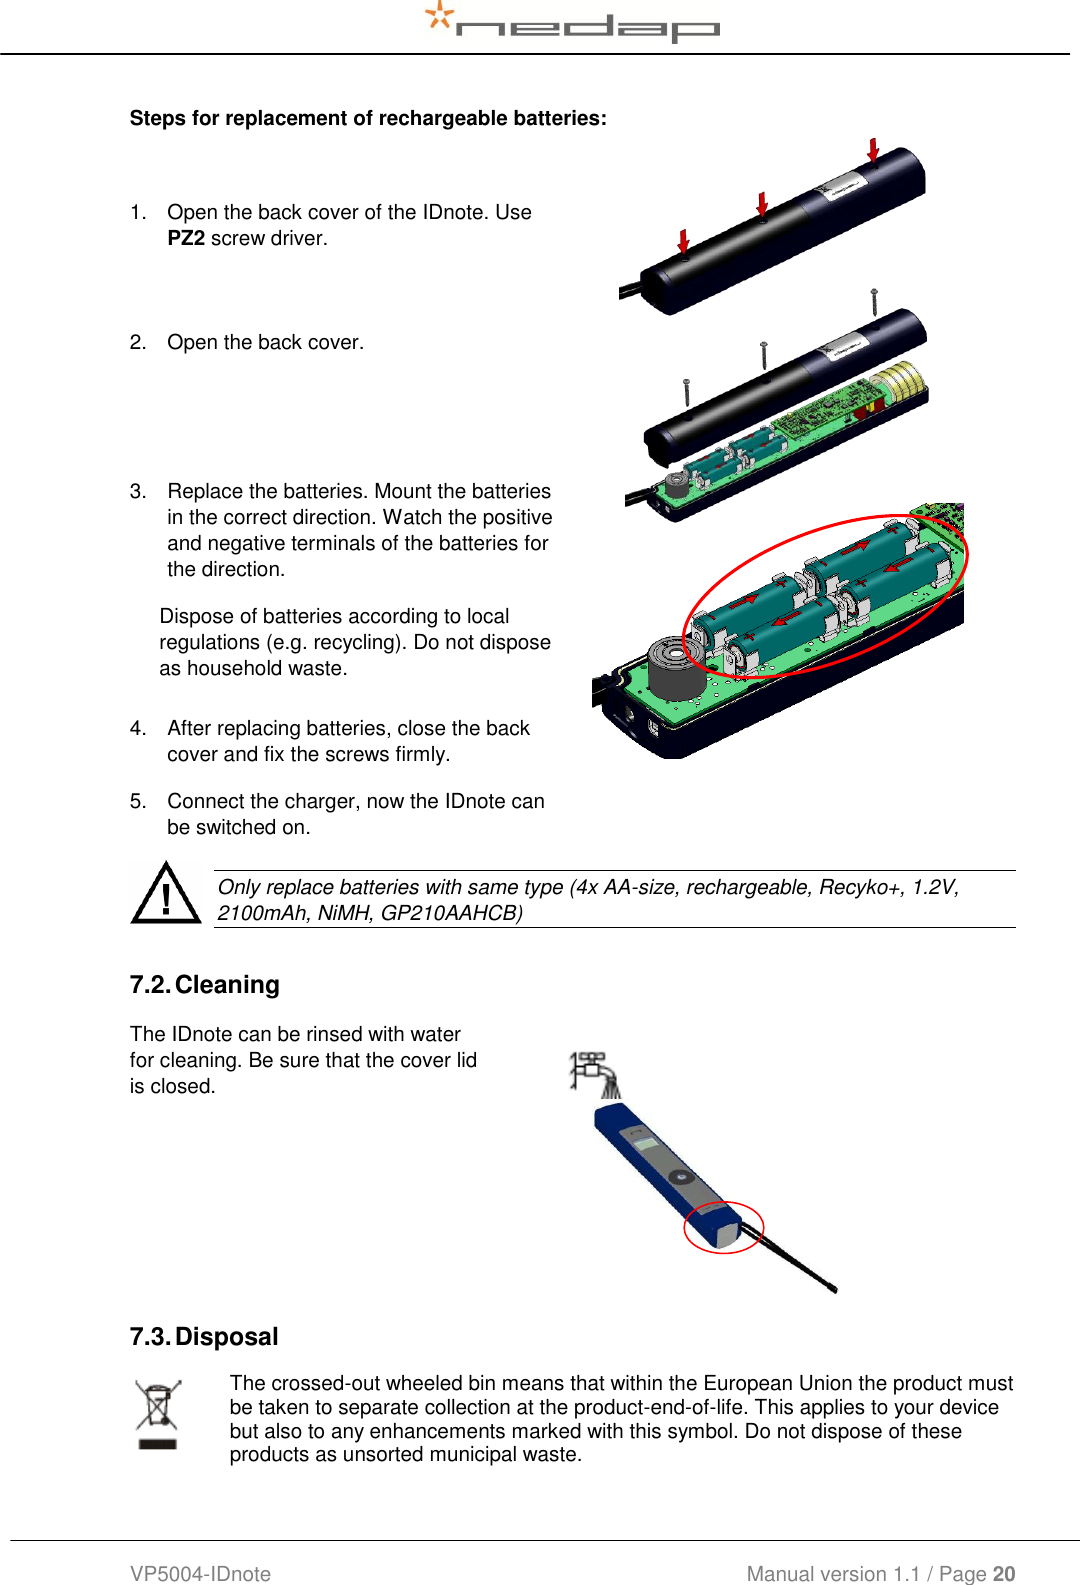  VP5004-IDnote                                             Manual version 1.1 / Page 20  Steps for replacement of rechargeable batteries: 7.2. Cleaning The IDnote can be rinsed with water for cleaning. Be sure that the cover lid is closed.   7.3. Disposal  The crossed-out wheeled bin means that within the European Union the product must be taken to separate collection at the product-end-of-life. This applies to your device but also to any enhancements marked with this symbol. Do not dispose of these products as unsorted municipal waste.   1.  Open the back cover of the IDnote. Use PZ2 screw driver.  2.  Open the back cover.  3.  Replace the batteries. Mount the batteries in the correct direction. Watch the positive and negative terminals of the batteries for the direction. Dispose of batteries according to local regulations (e.g. recycling). Do not dispose as household waste.  4.  After replacing batteries, close the back cover and fix the screws firmly.  5.  Connect the charger, now the IDnote can be switched on.    Only replace batteries with same type (4x AA-size, rechargeable, Recyko+, 1.2V, 2100mAh, NiMH, GP210AAHCB)    